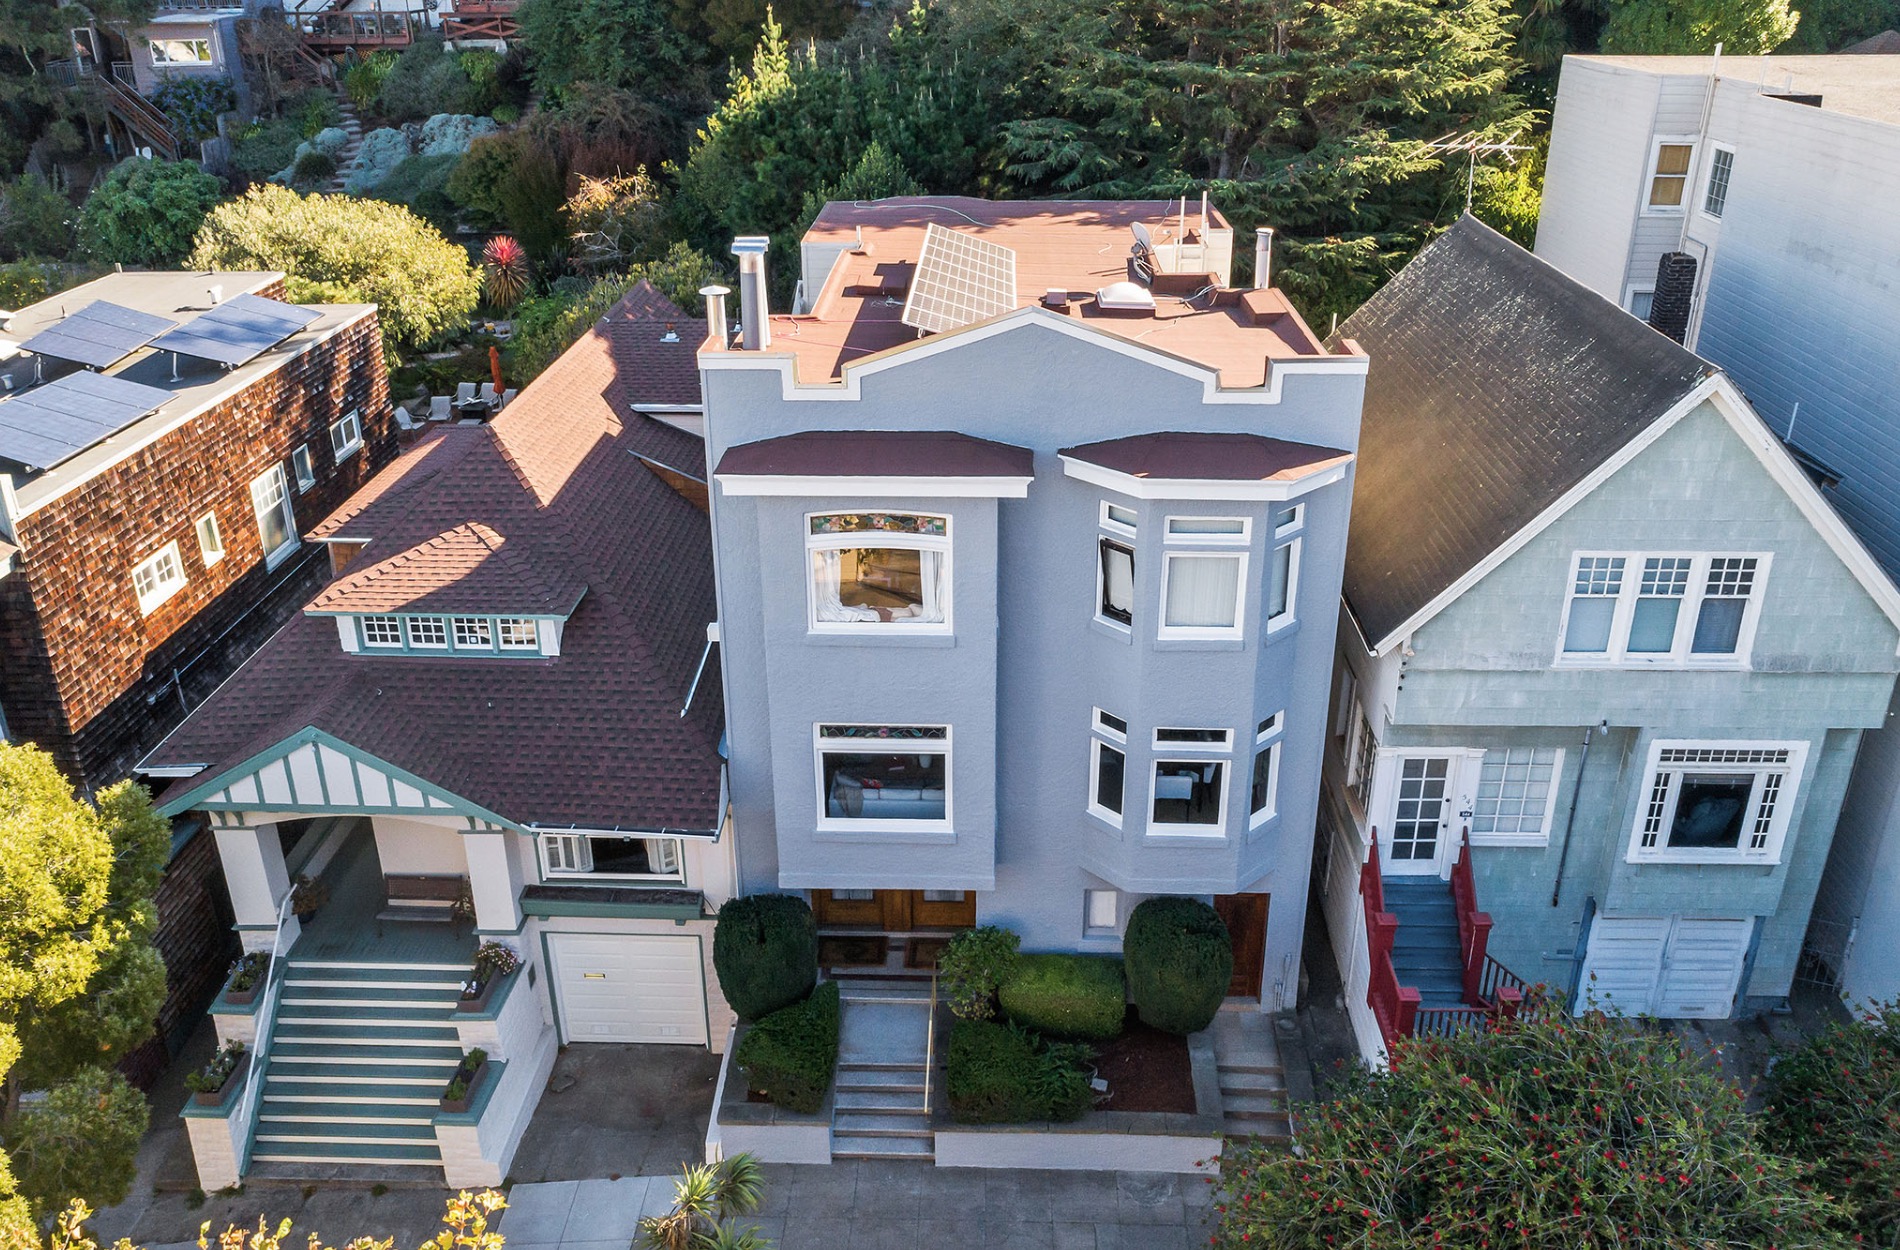 Property Photo: Aerial view of 540-542 Belvedere Street, showing a pale blue home